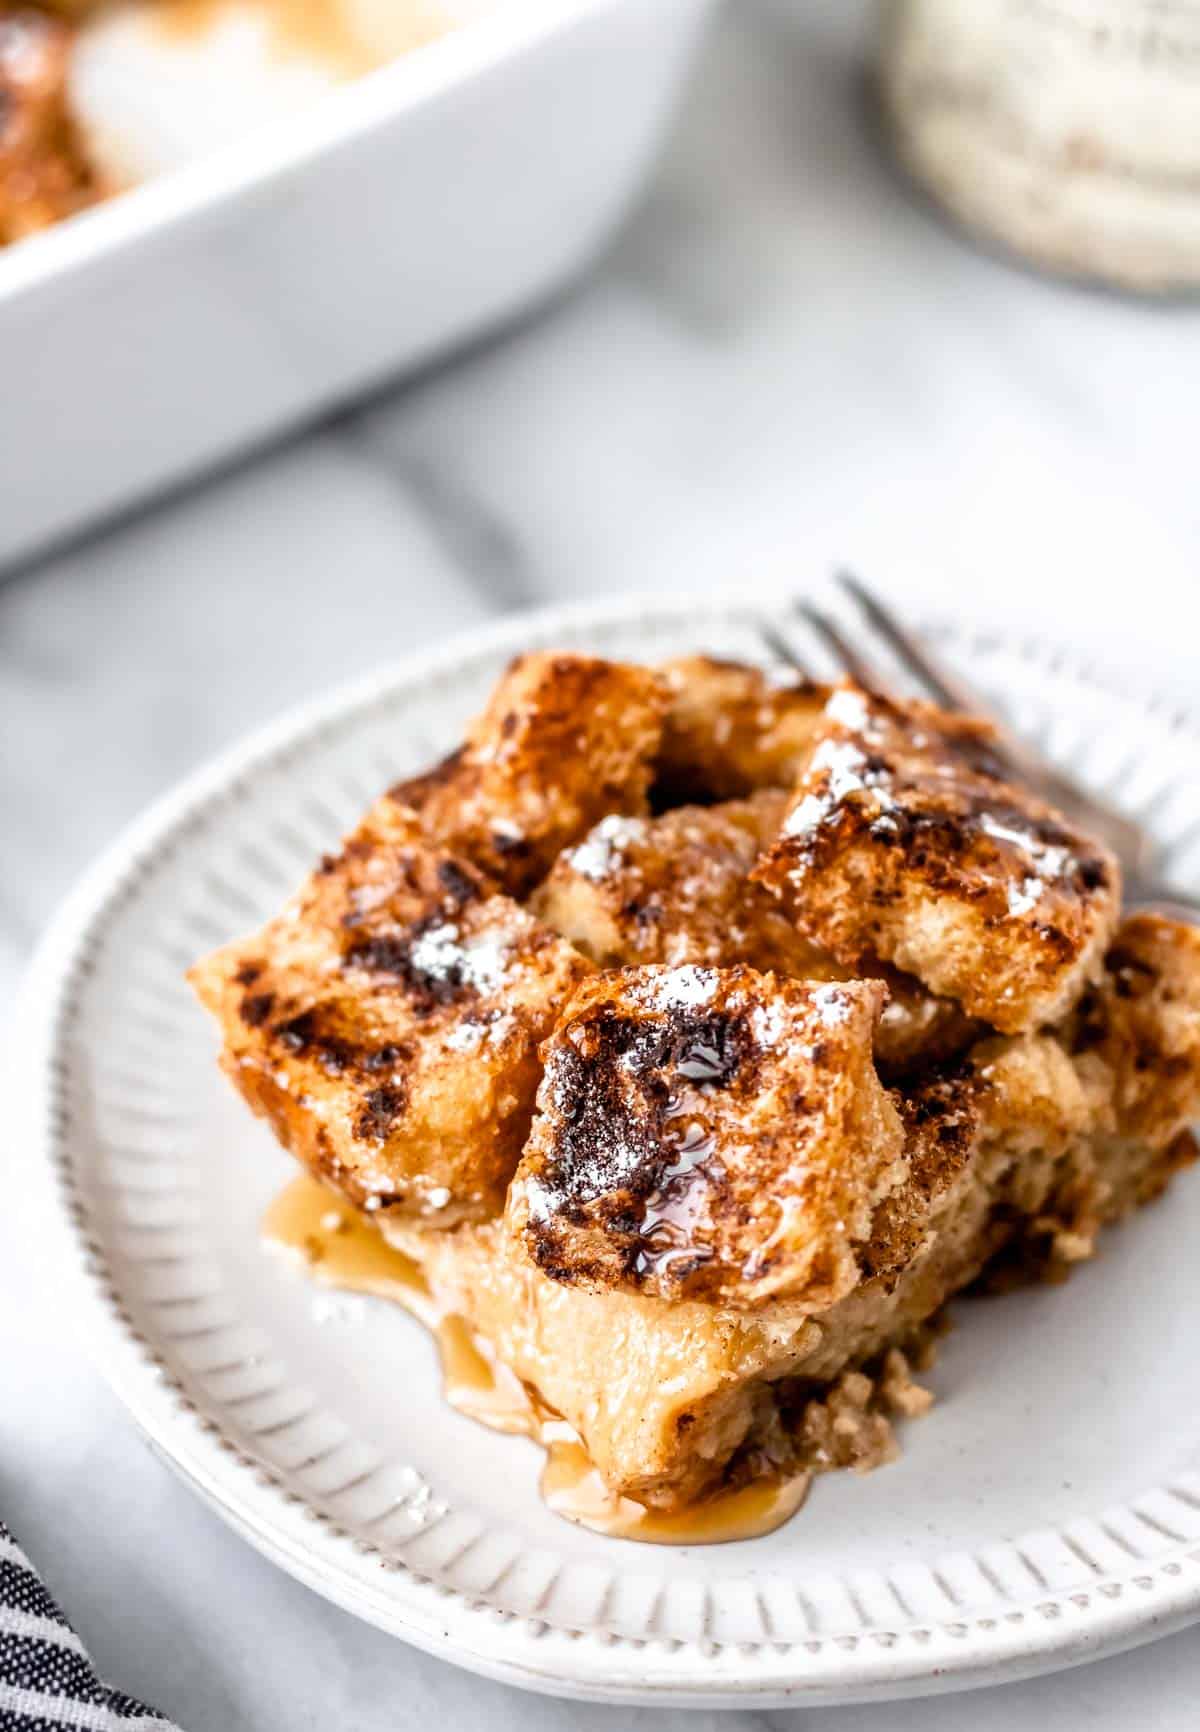 A serving of French Toast Casserole topped with maple syrup and powdered sugar on a small plate with a fork and part of the baking dish in the background.